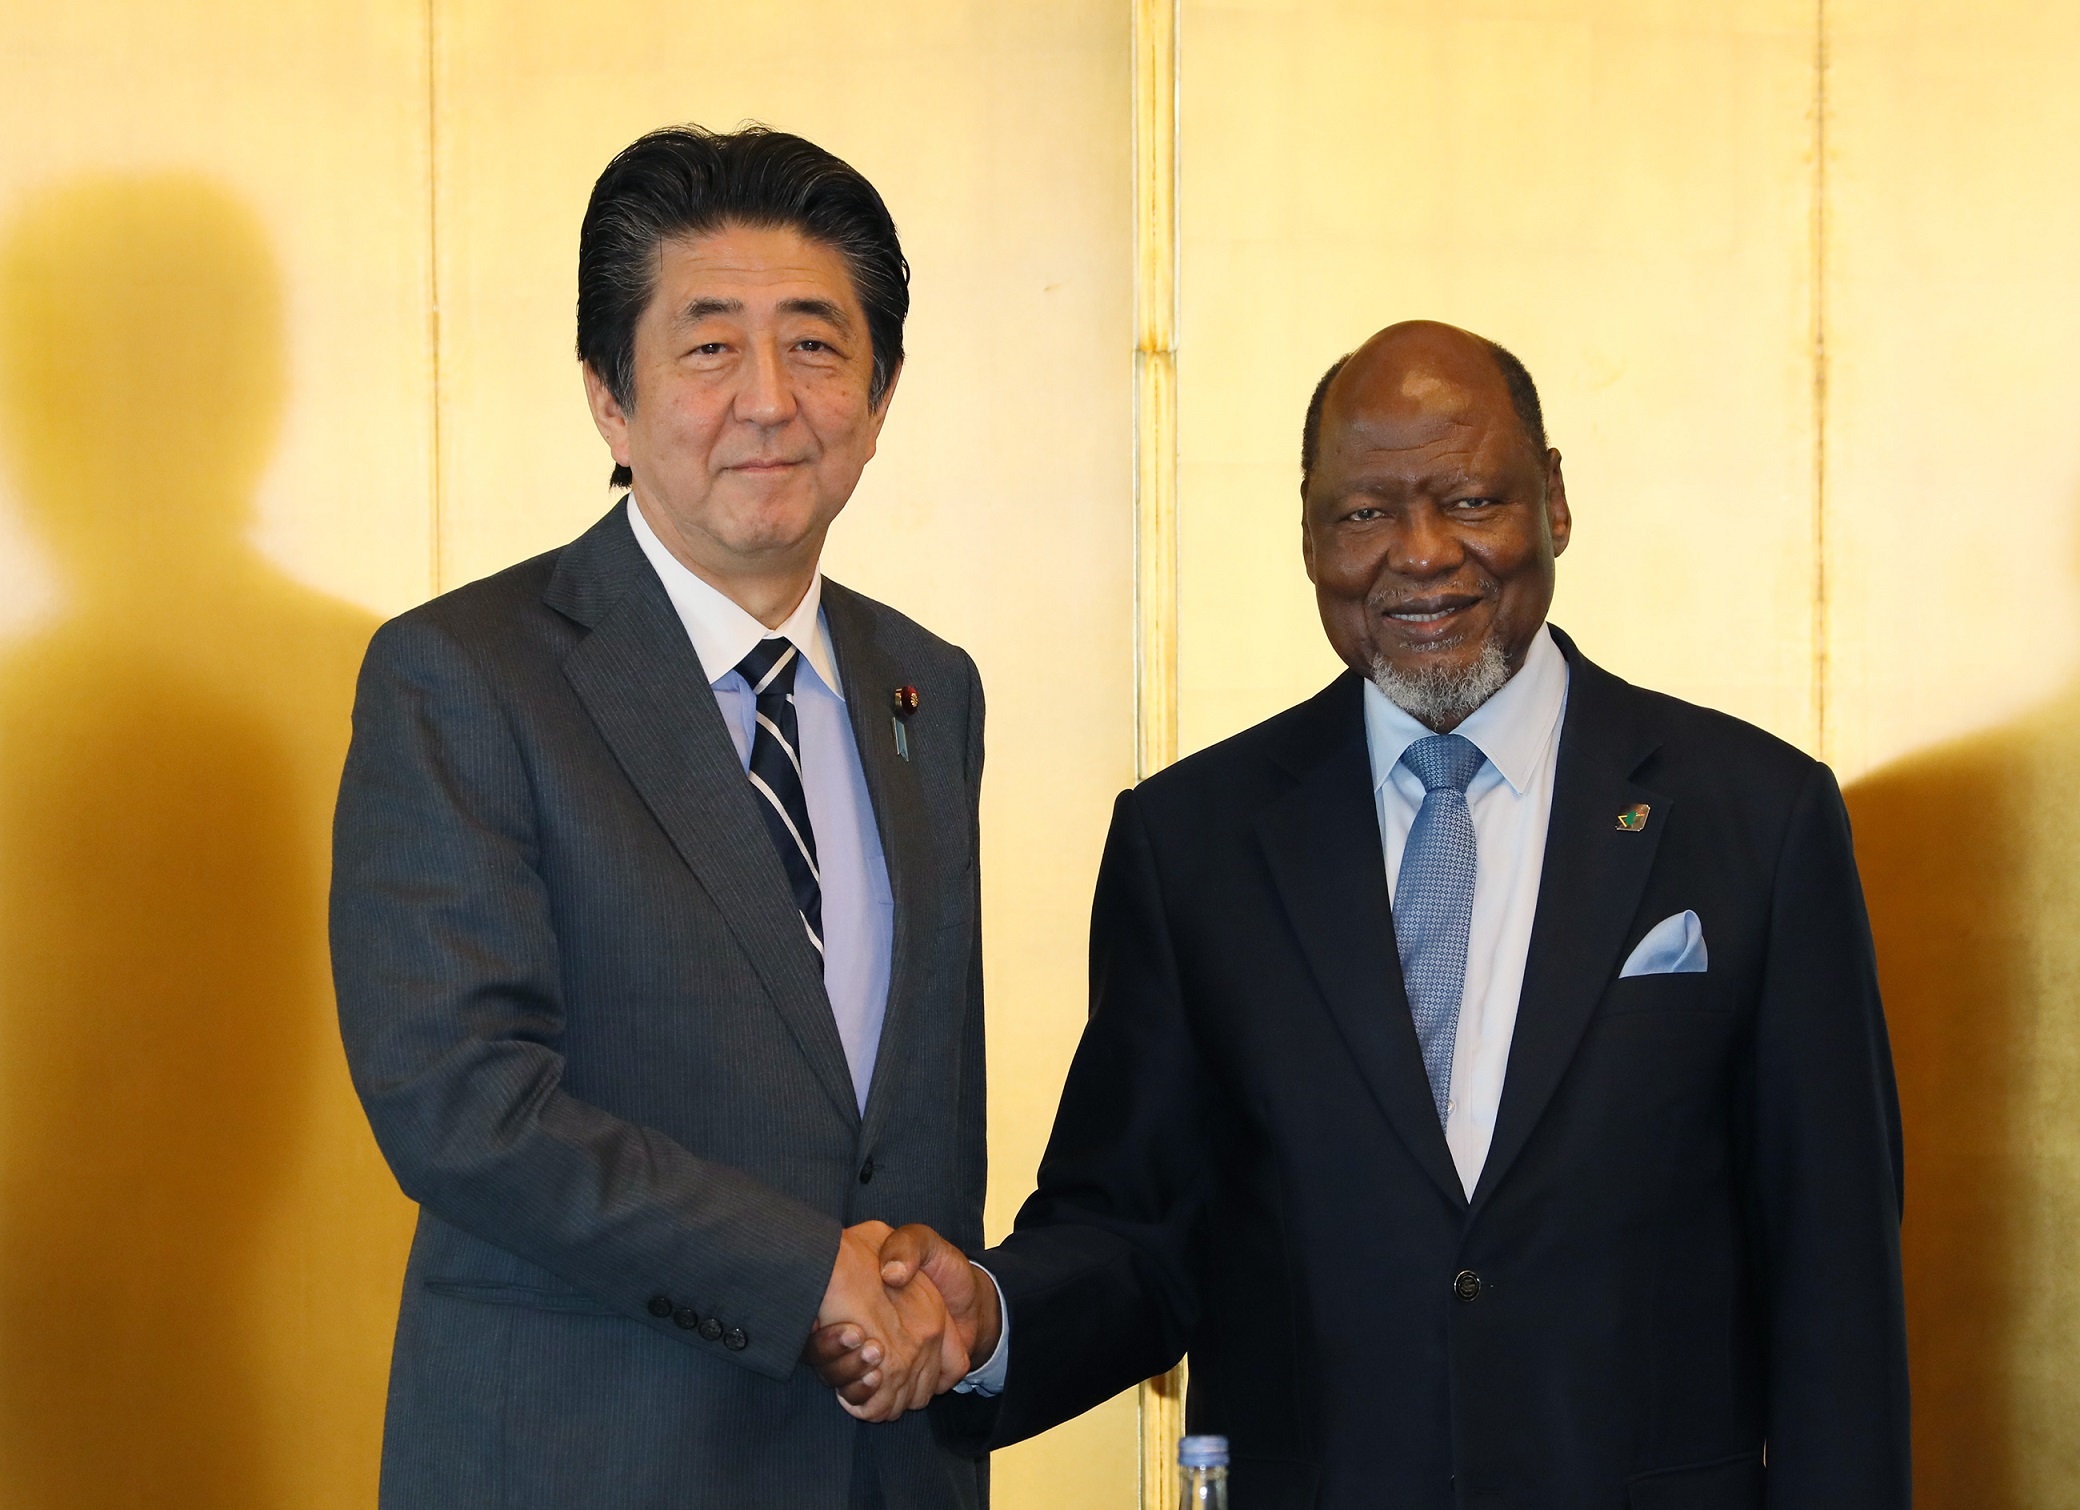 Photograph of the meeting with Former President of Mozambique